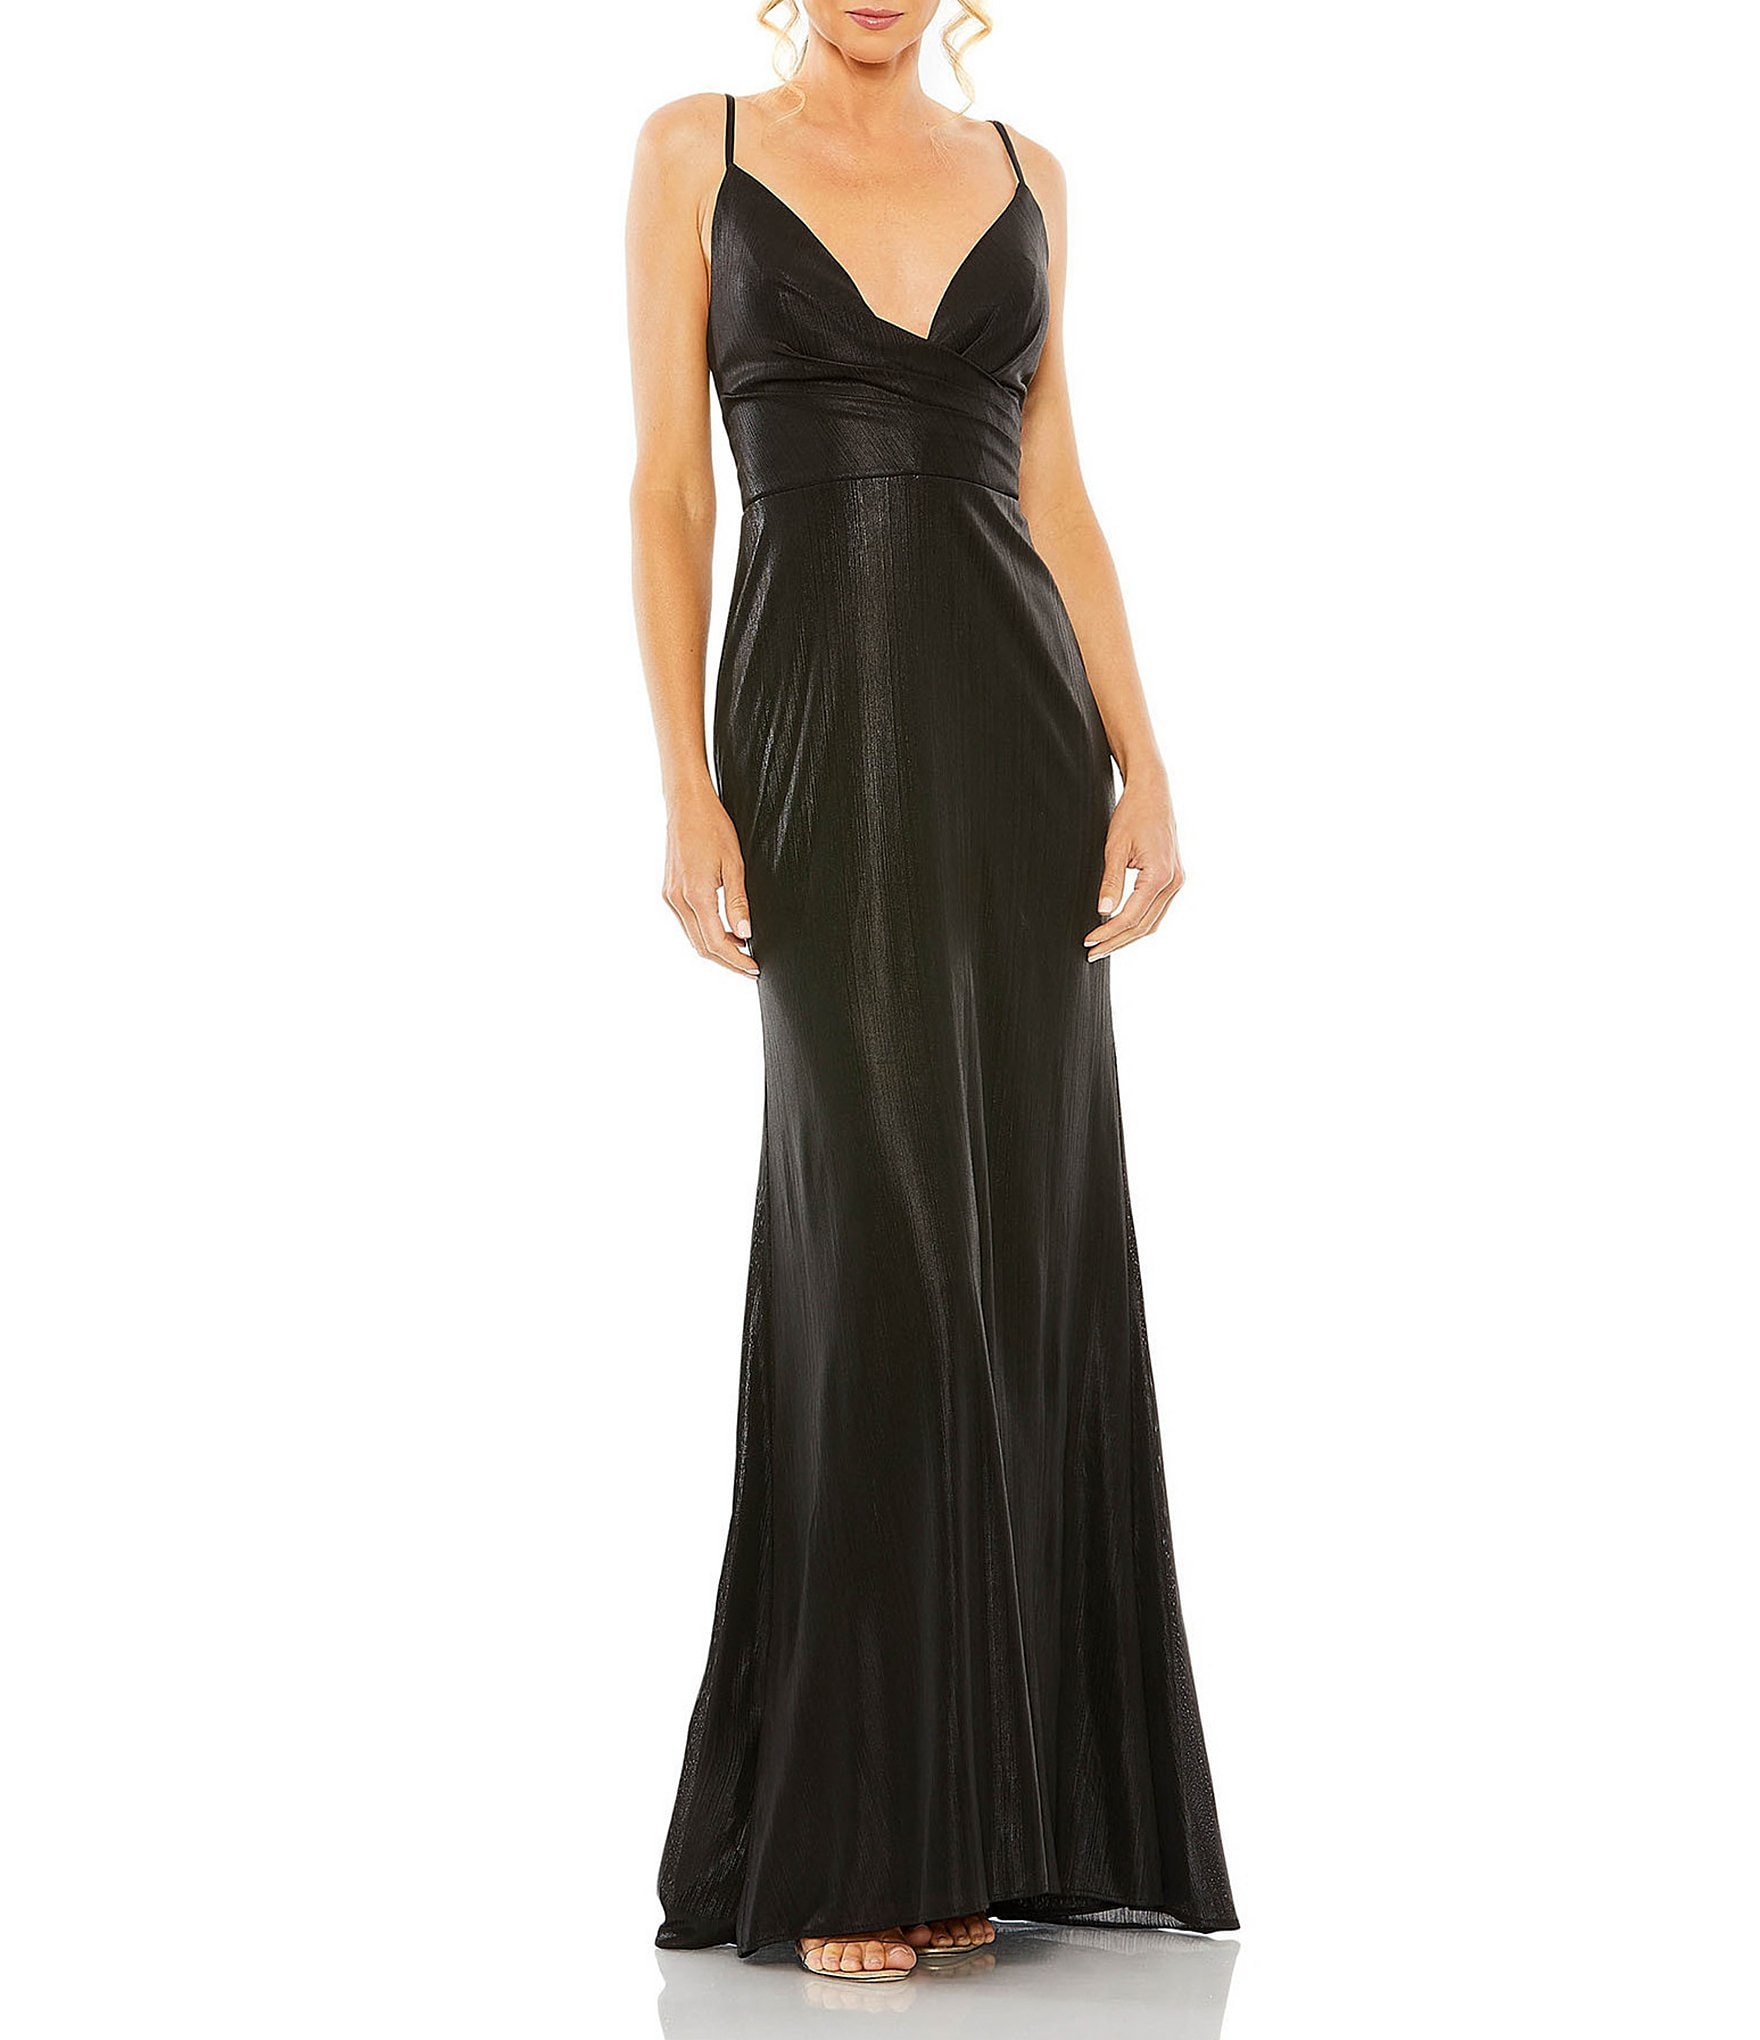 Mac Duggal Sequin Plunging V Halter Neck Sleeveless Sheath Gown